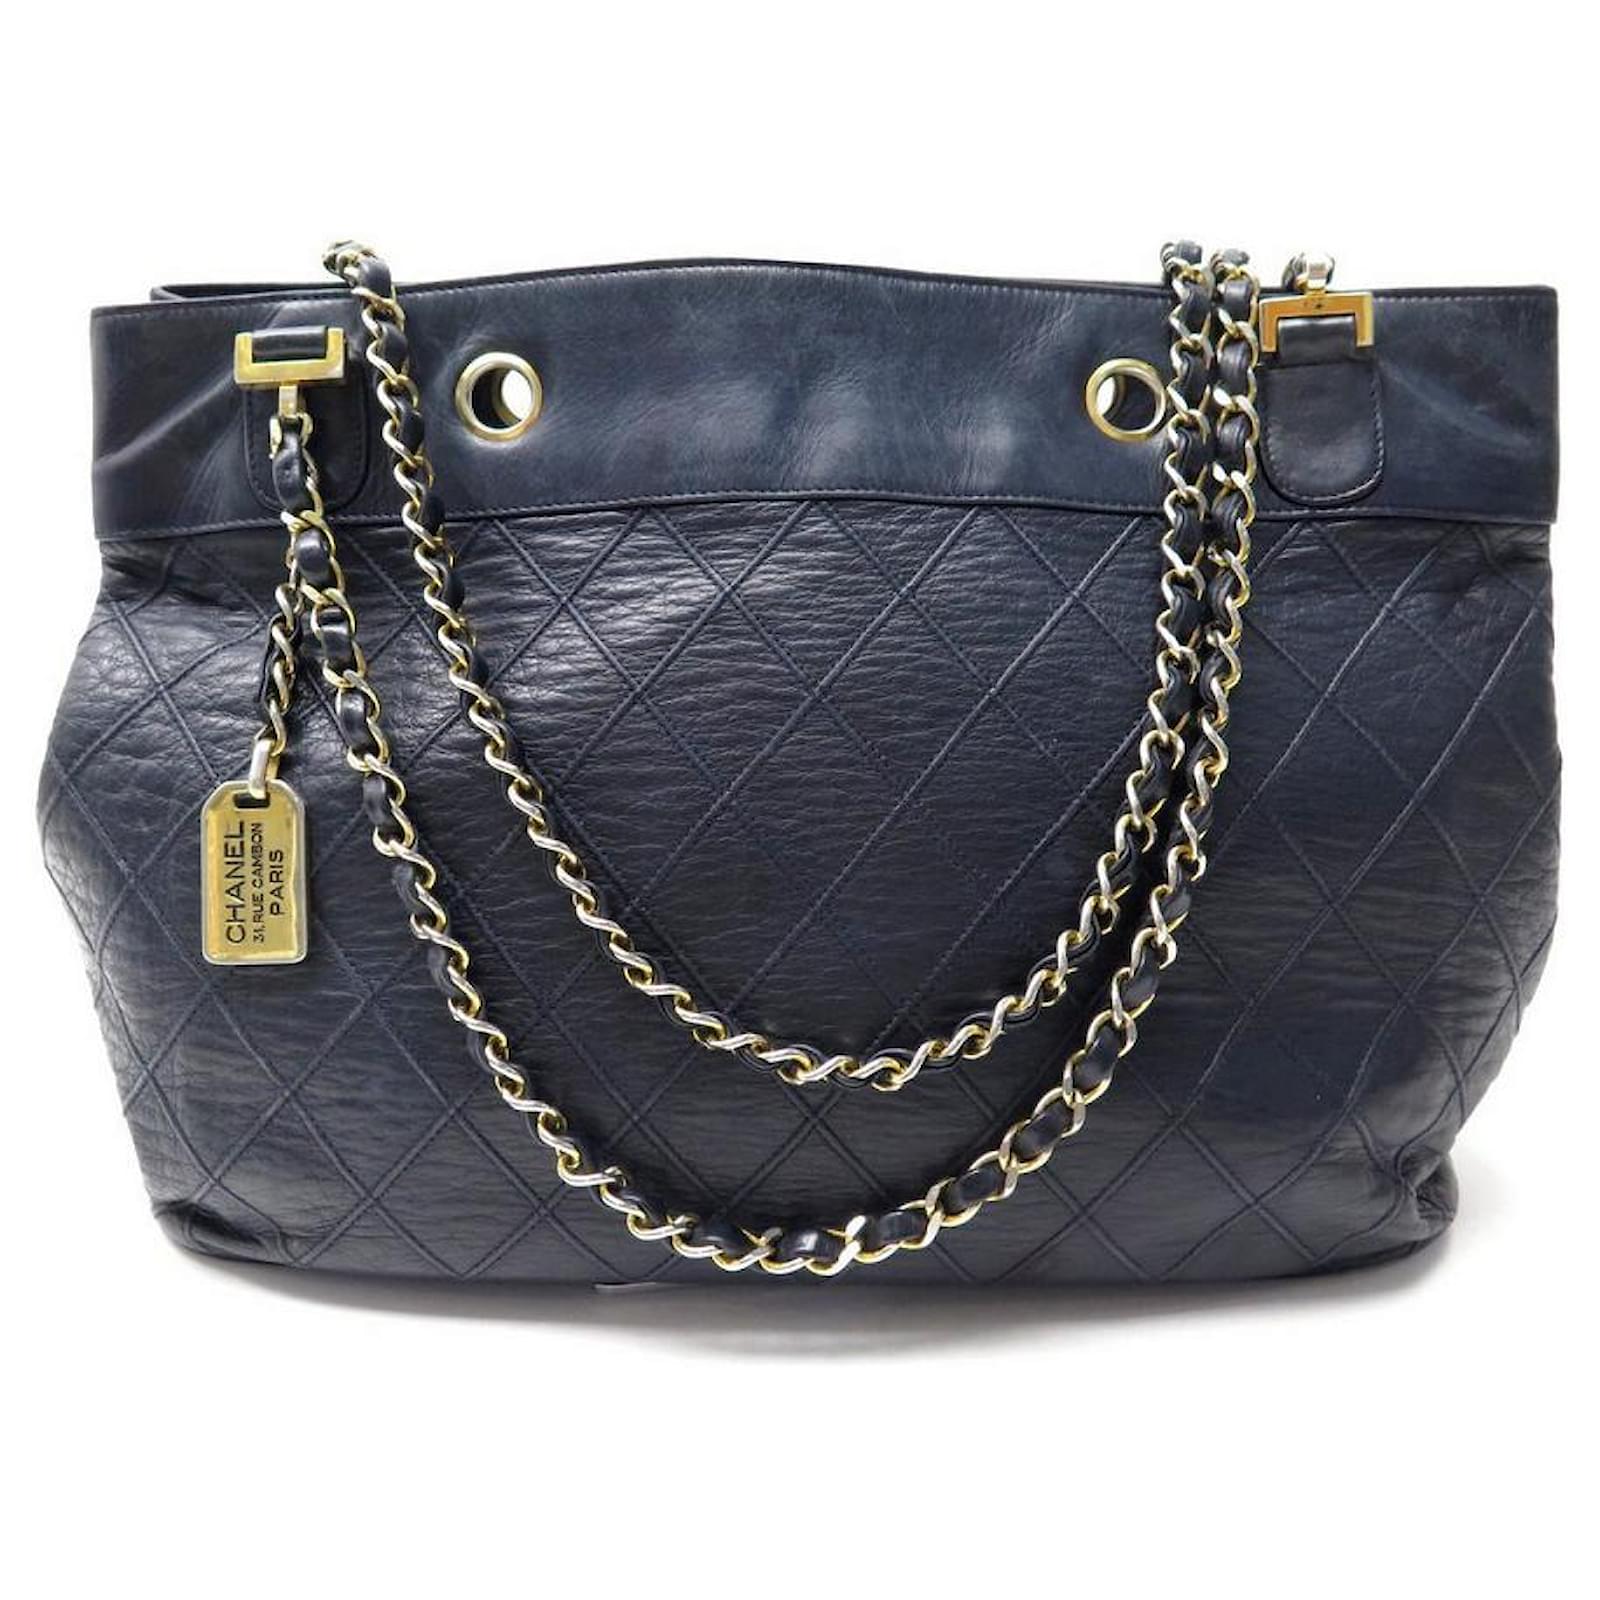 VINTAGE CHANEL CABAS SHOPPING HANDBAG NAVY BLUE QUILTED LEATHER